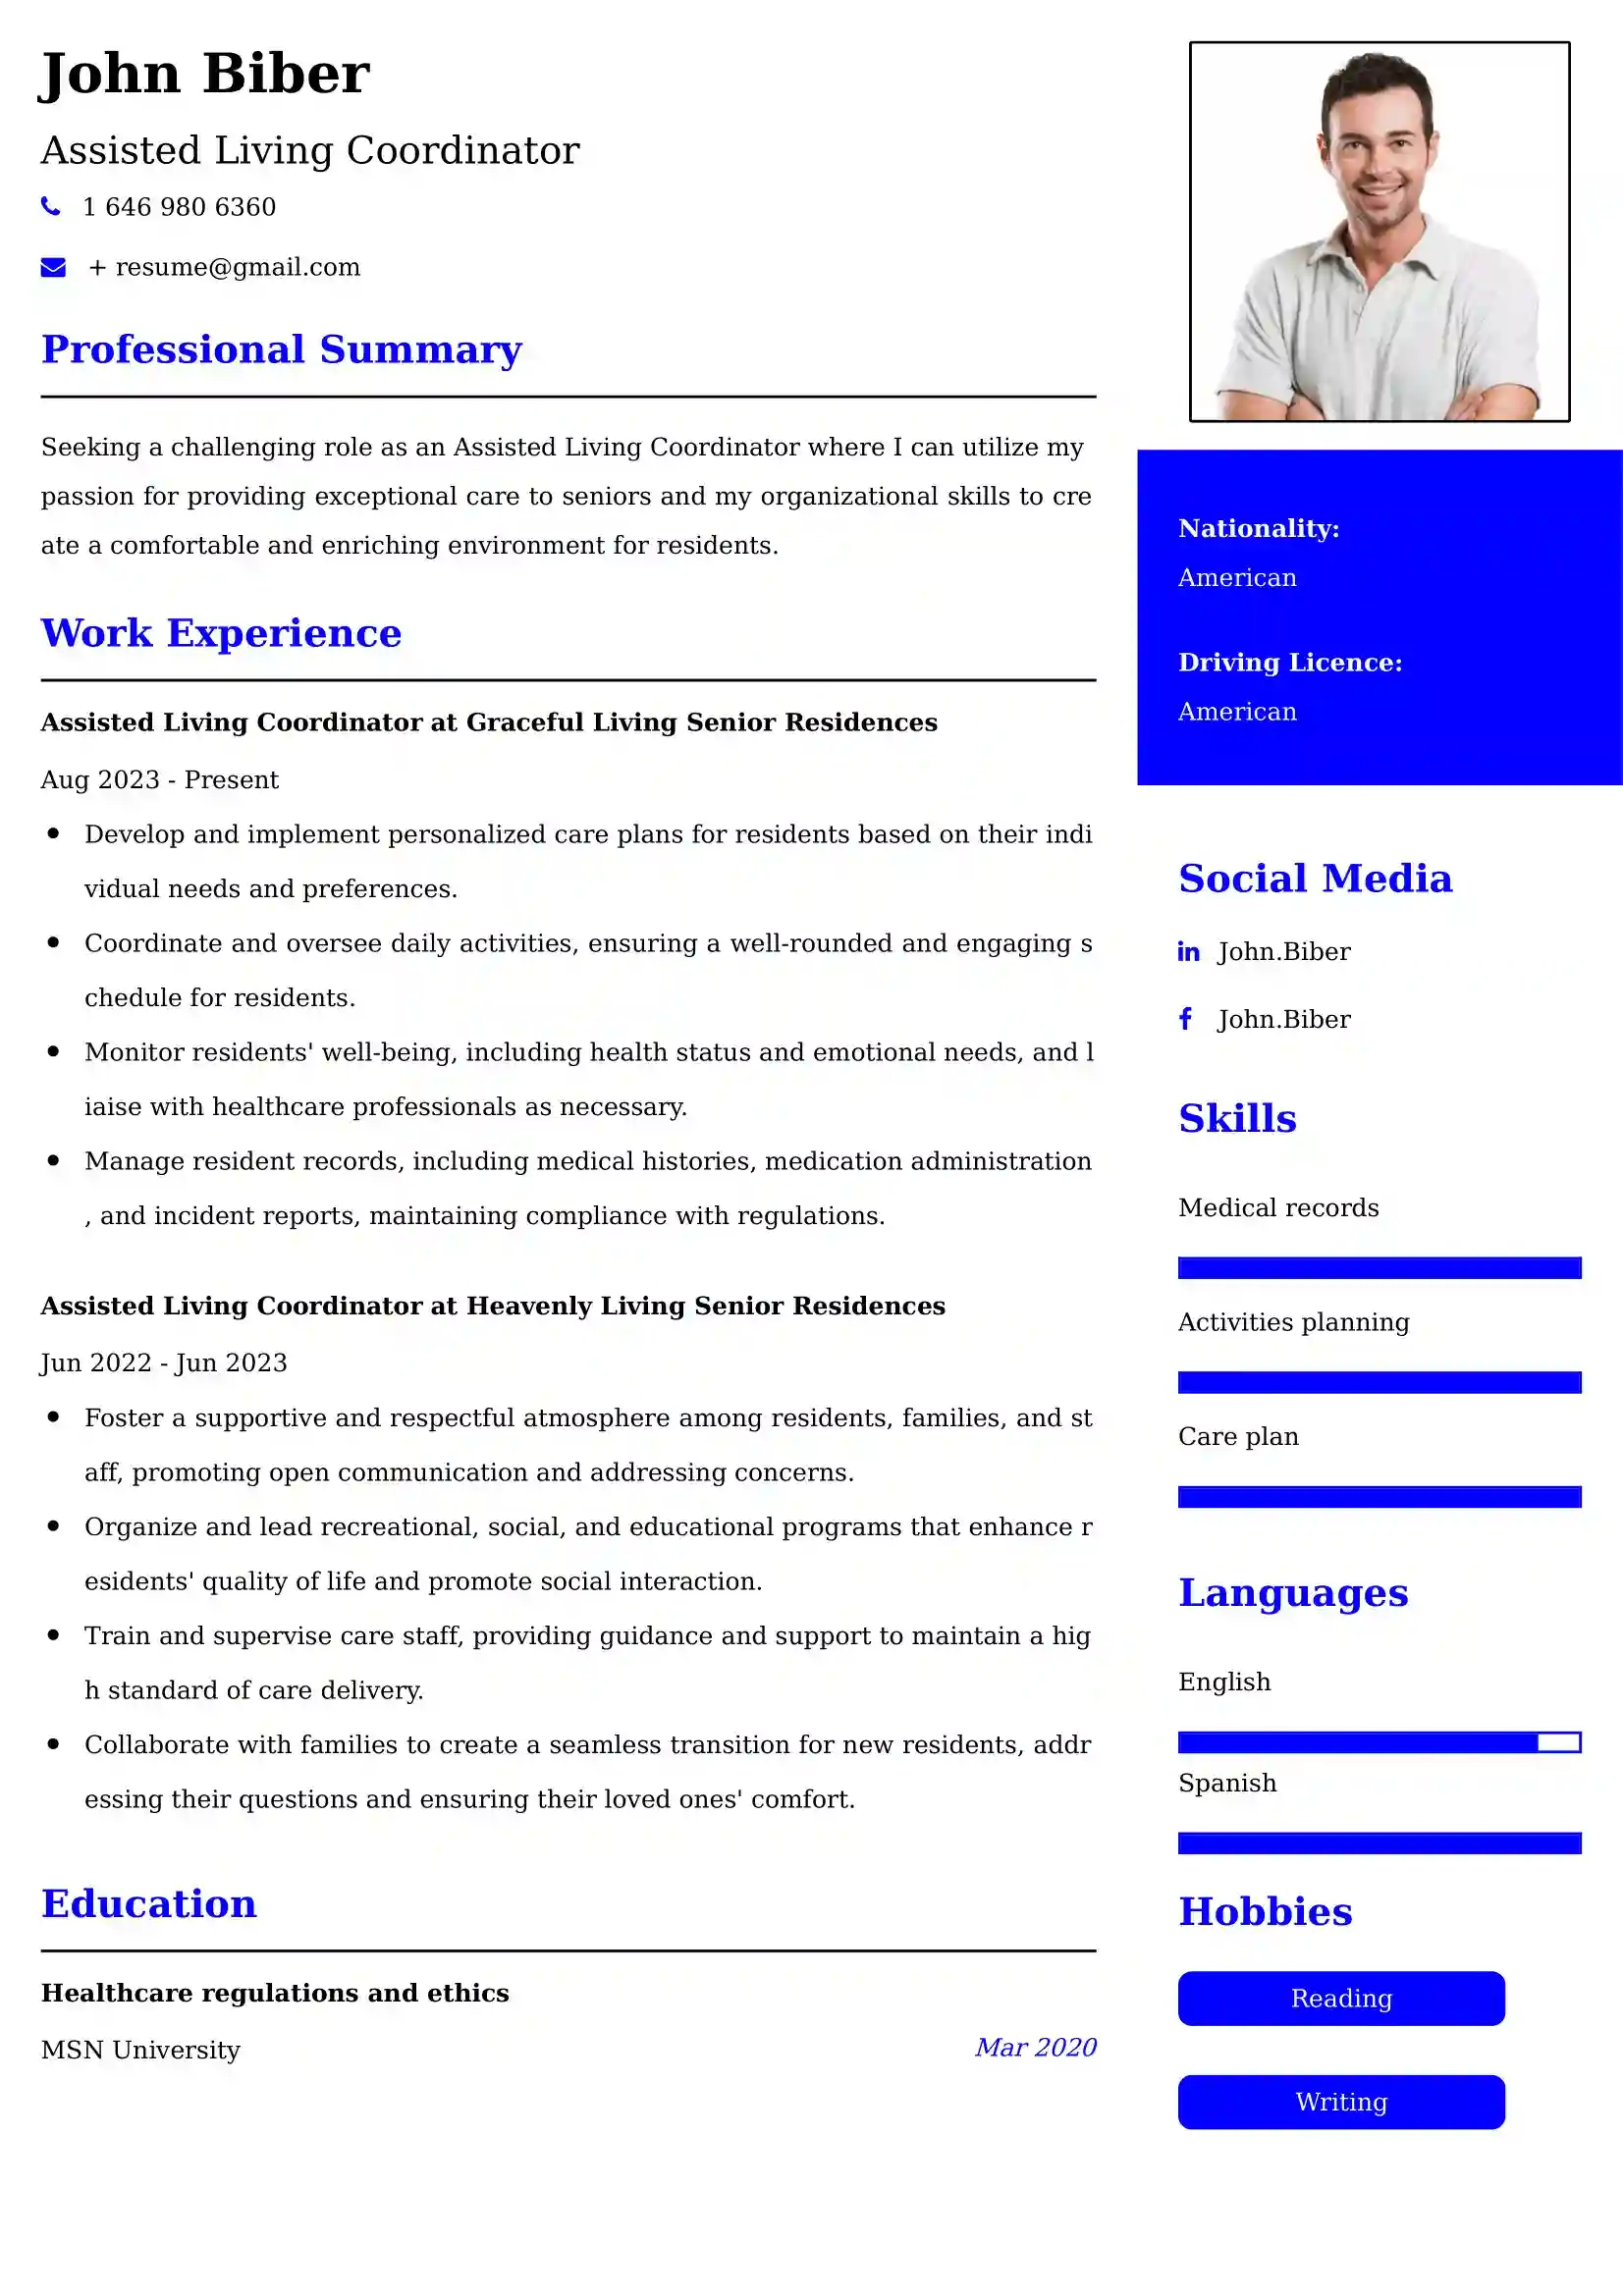 Assisted Living Coordinator Resume Examples for UK Jobs - Tips and Guide